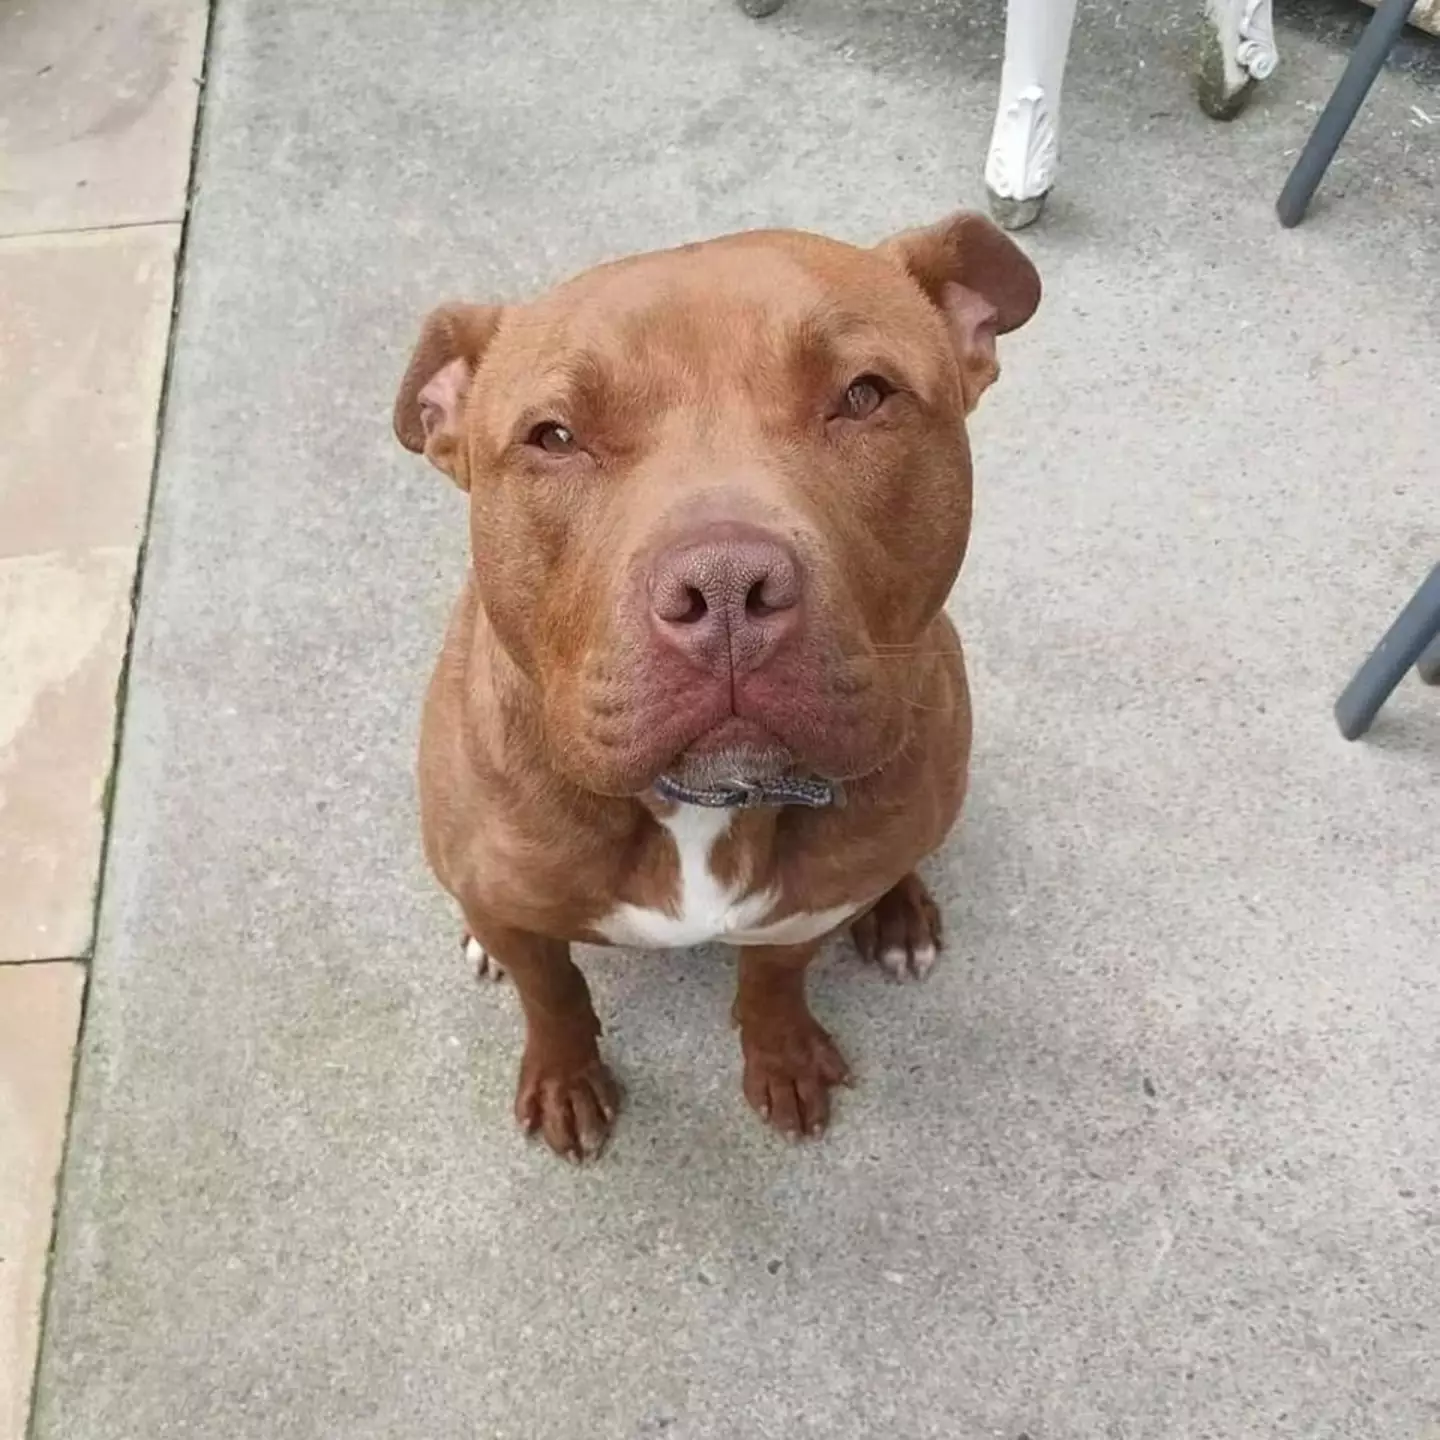 The bully mix was on a walk with his new family when he was punched by grown men.